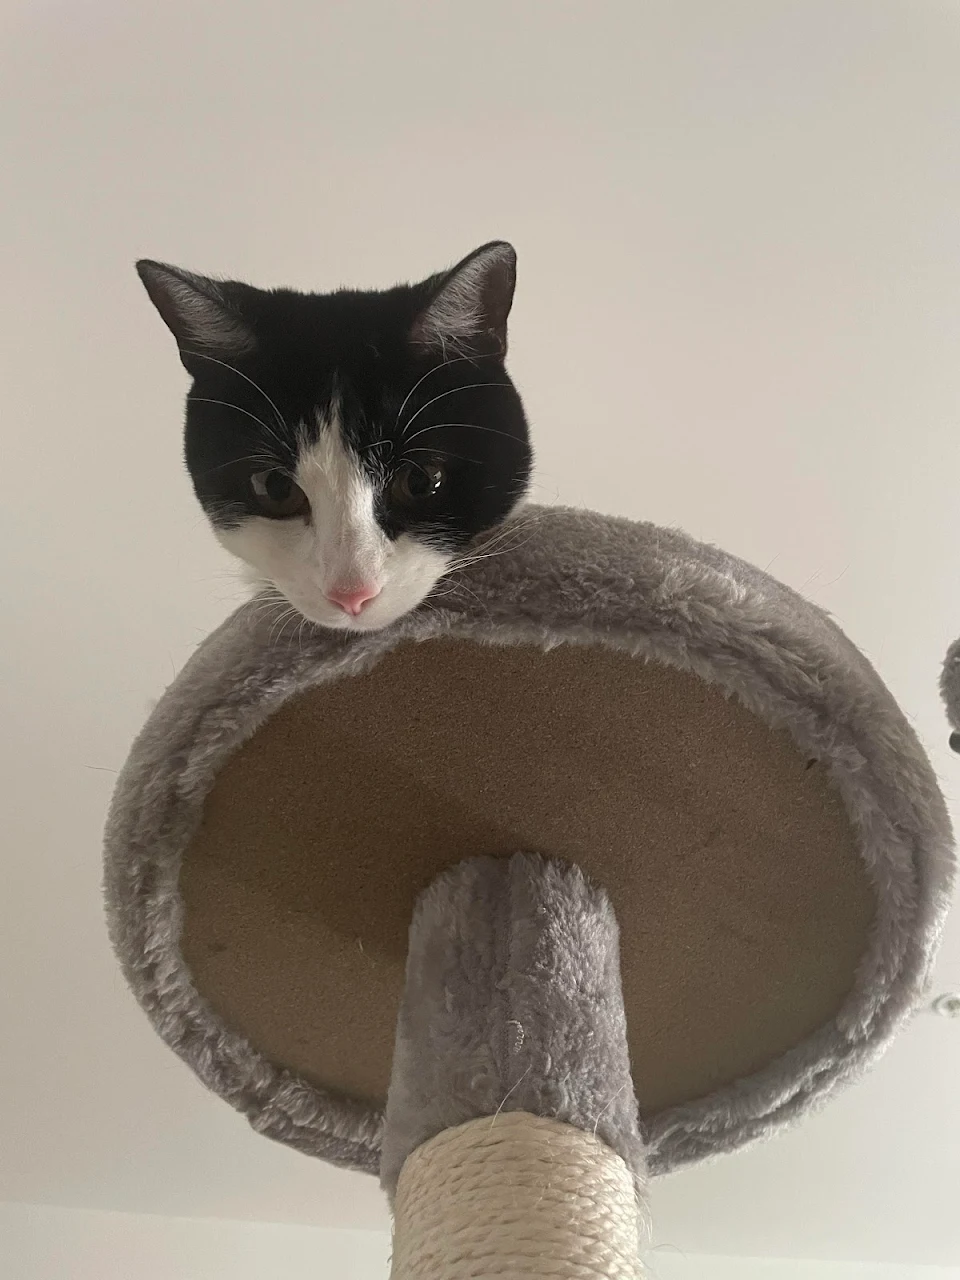 This cat on top of a cat tree